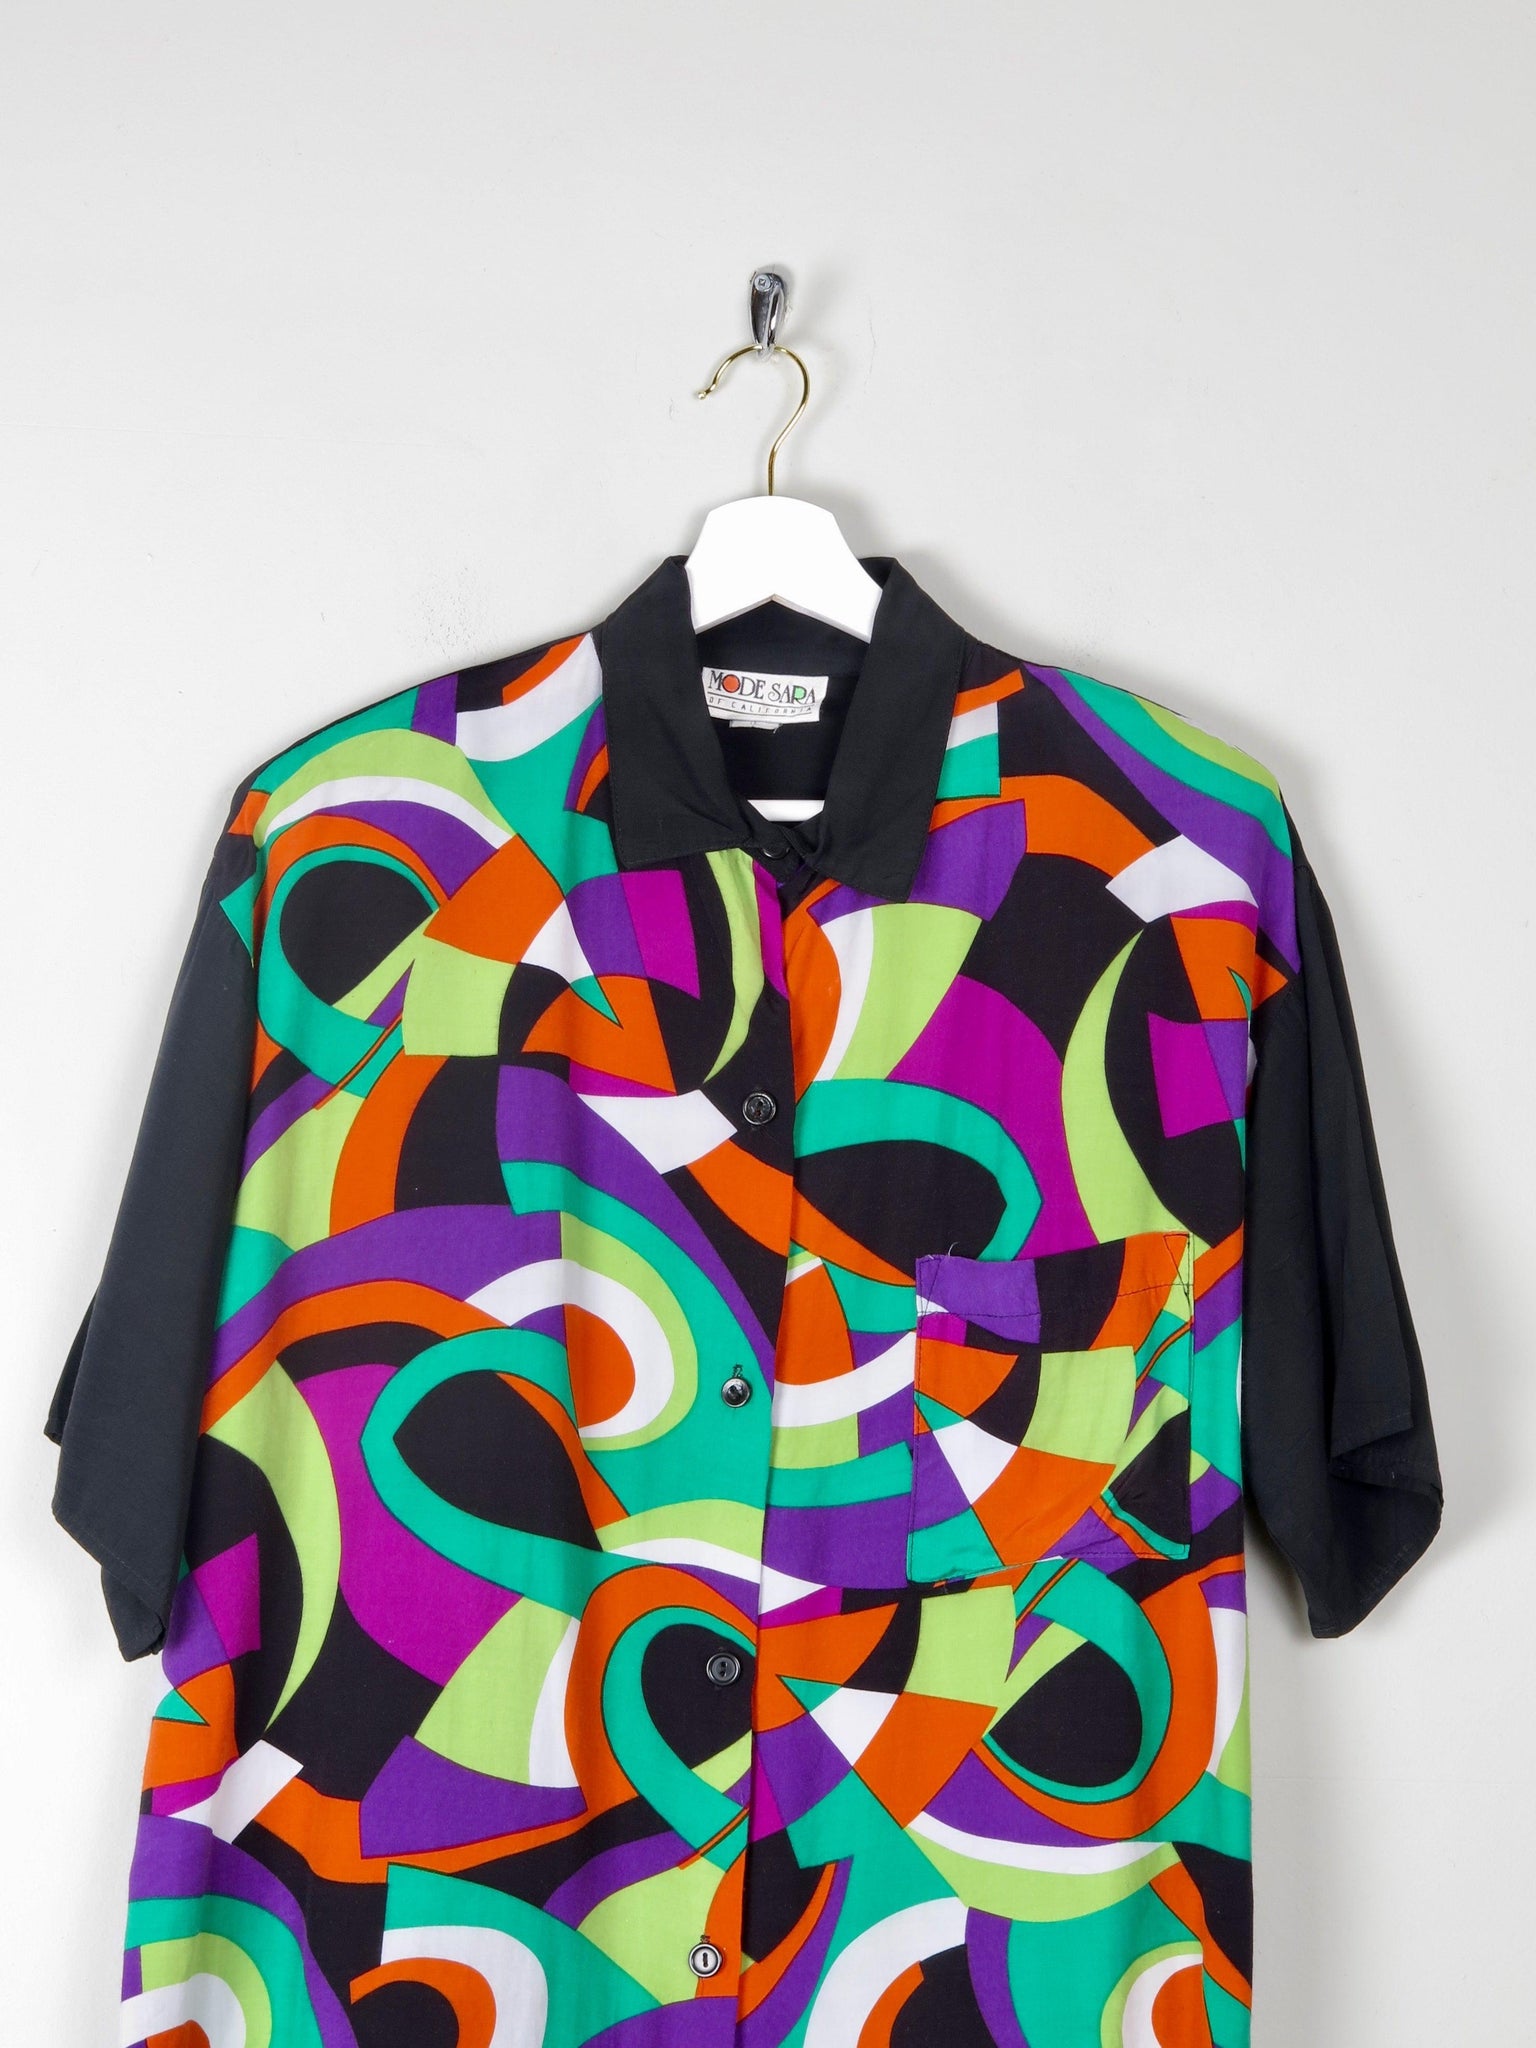 Women's Bright Graphic Printed Blouse L - The Harlequin